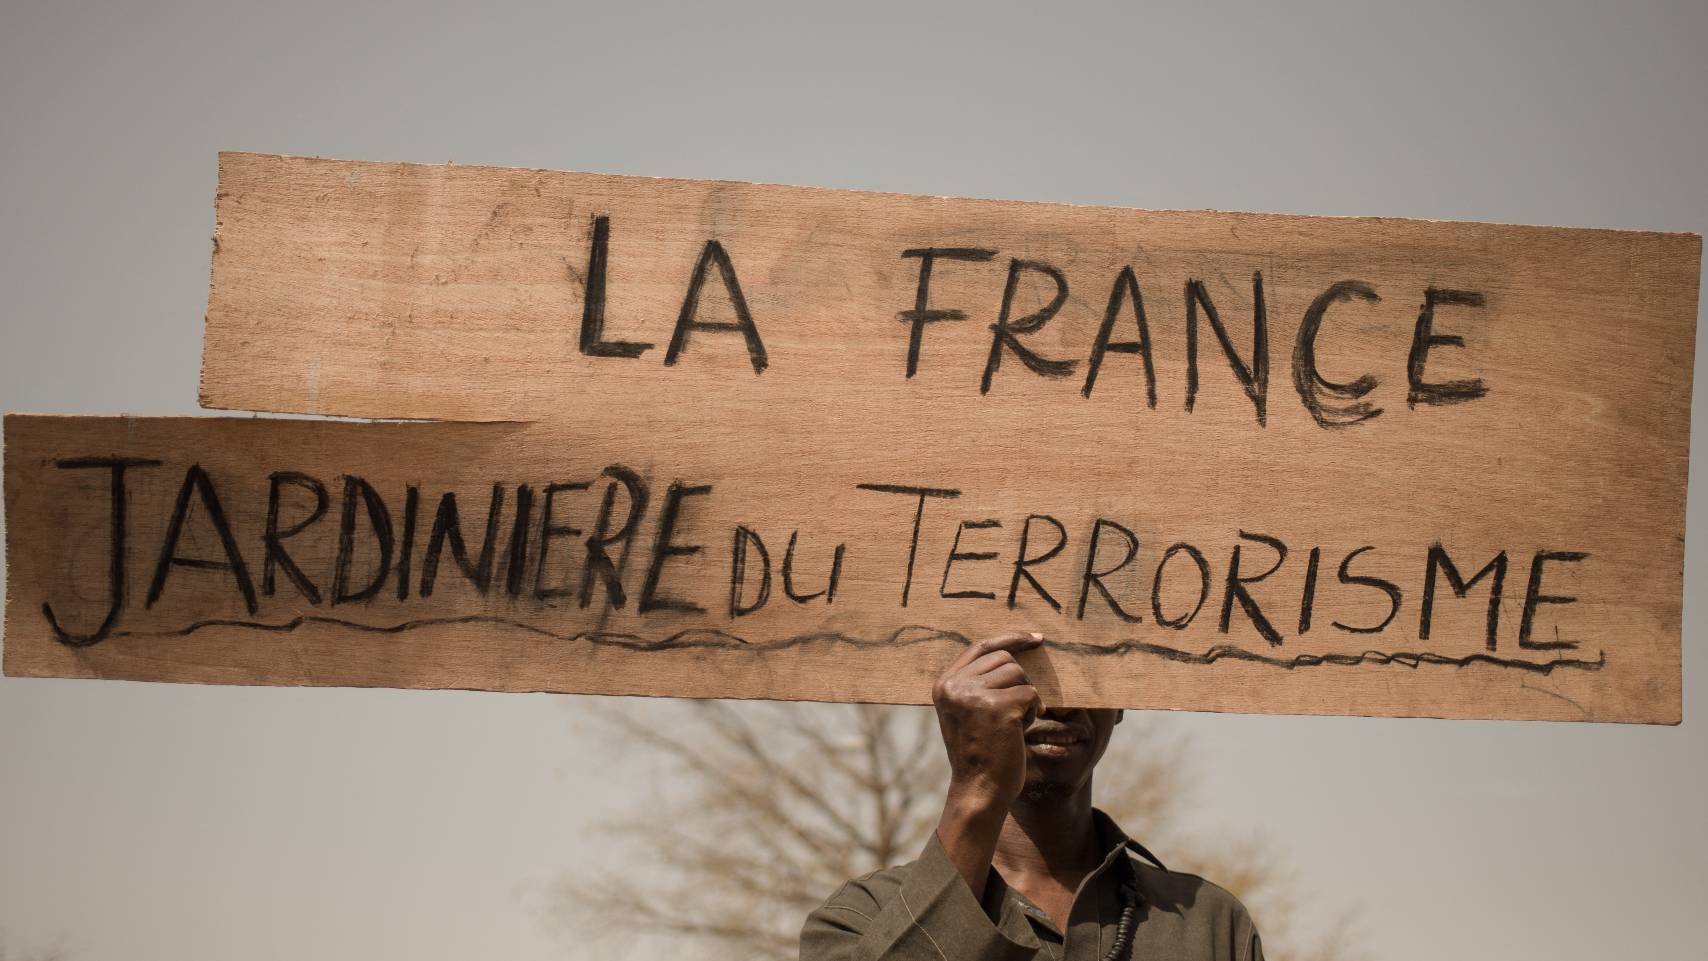 A protester holds a placard reading "France, gardener of terrorism" during a demonstration organised by the pan-Africanst platform Yerewolo to celebrate France's announcement to withdraw French troops from Mali, in Bamako, on February 19, 2022.